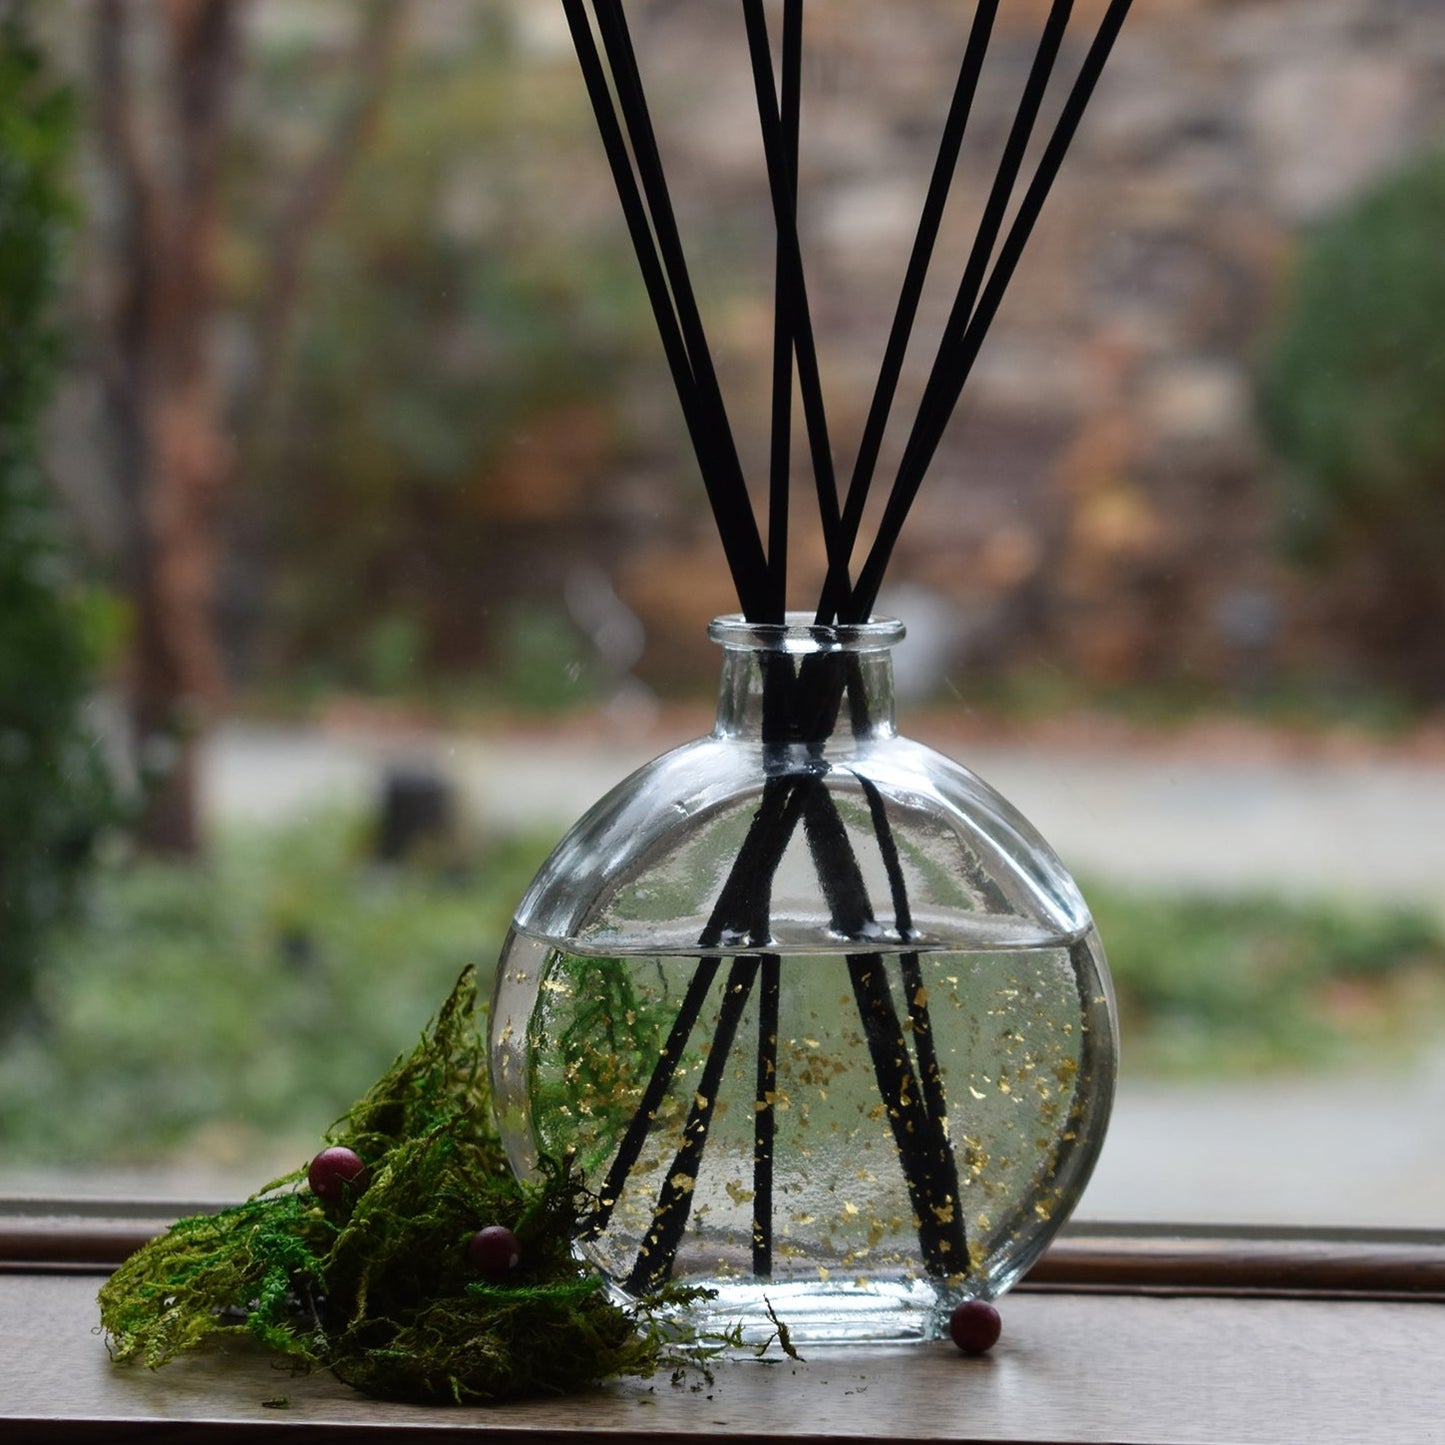 Nordic Night Reed Diffuser